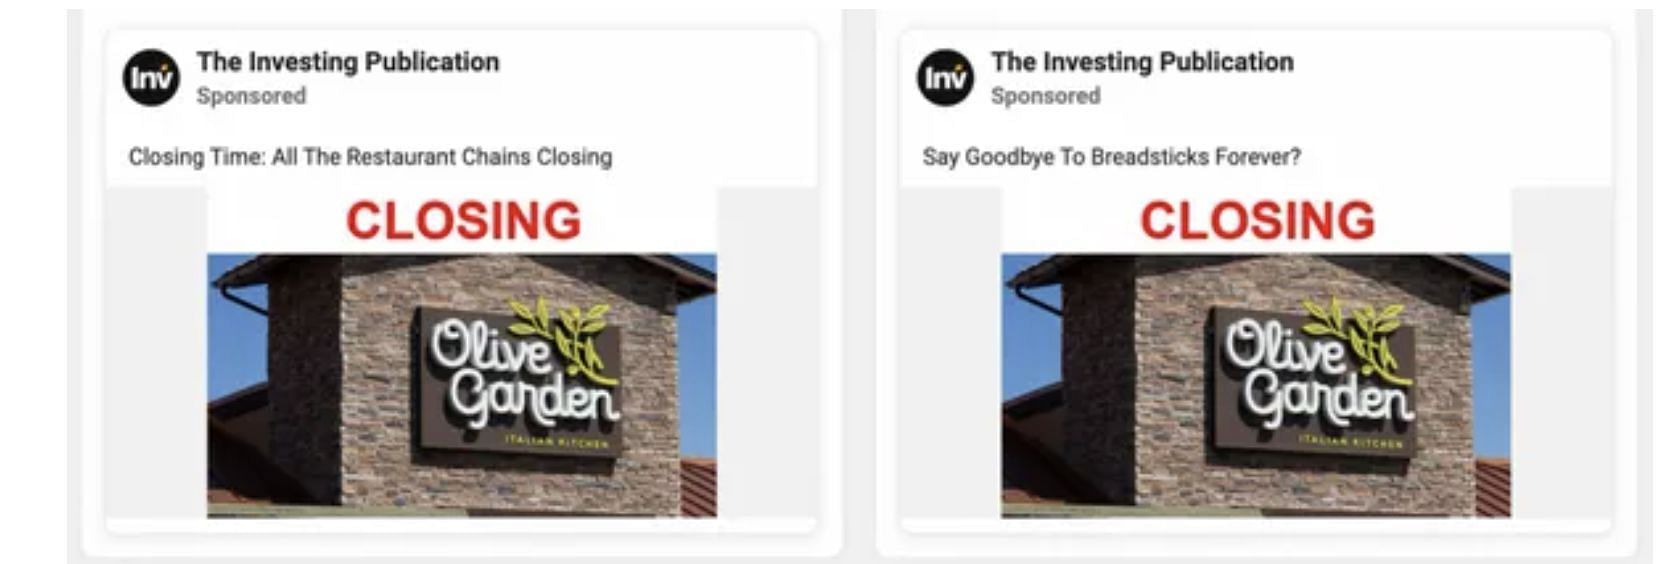 Fake news debunked as several Facebook ads claimed that the popular Italian restaurant is closing all its branches. (Image via Facebook/ @theinvestingpublication)